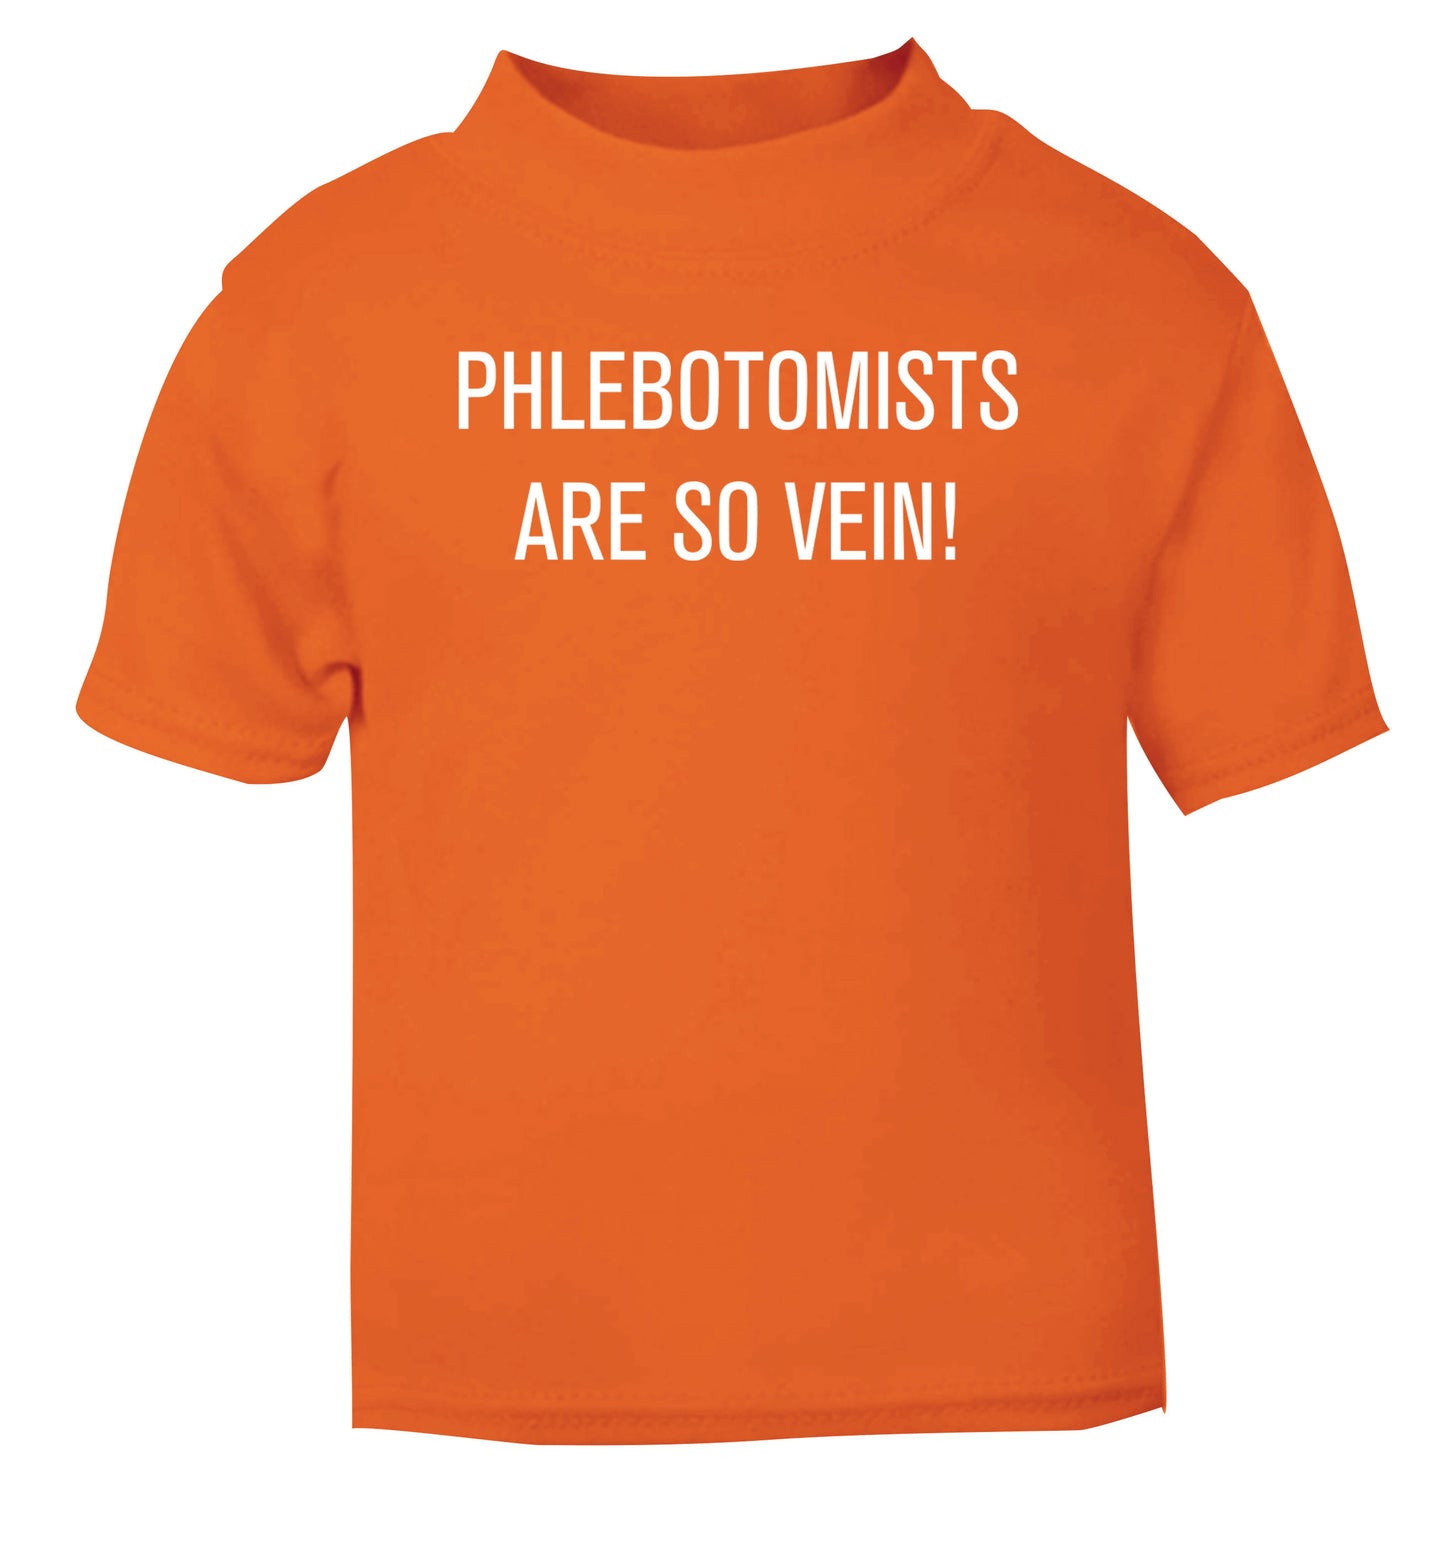 Phlebotomists are so vein! orange Baby Toddler Tshirt 2 Years